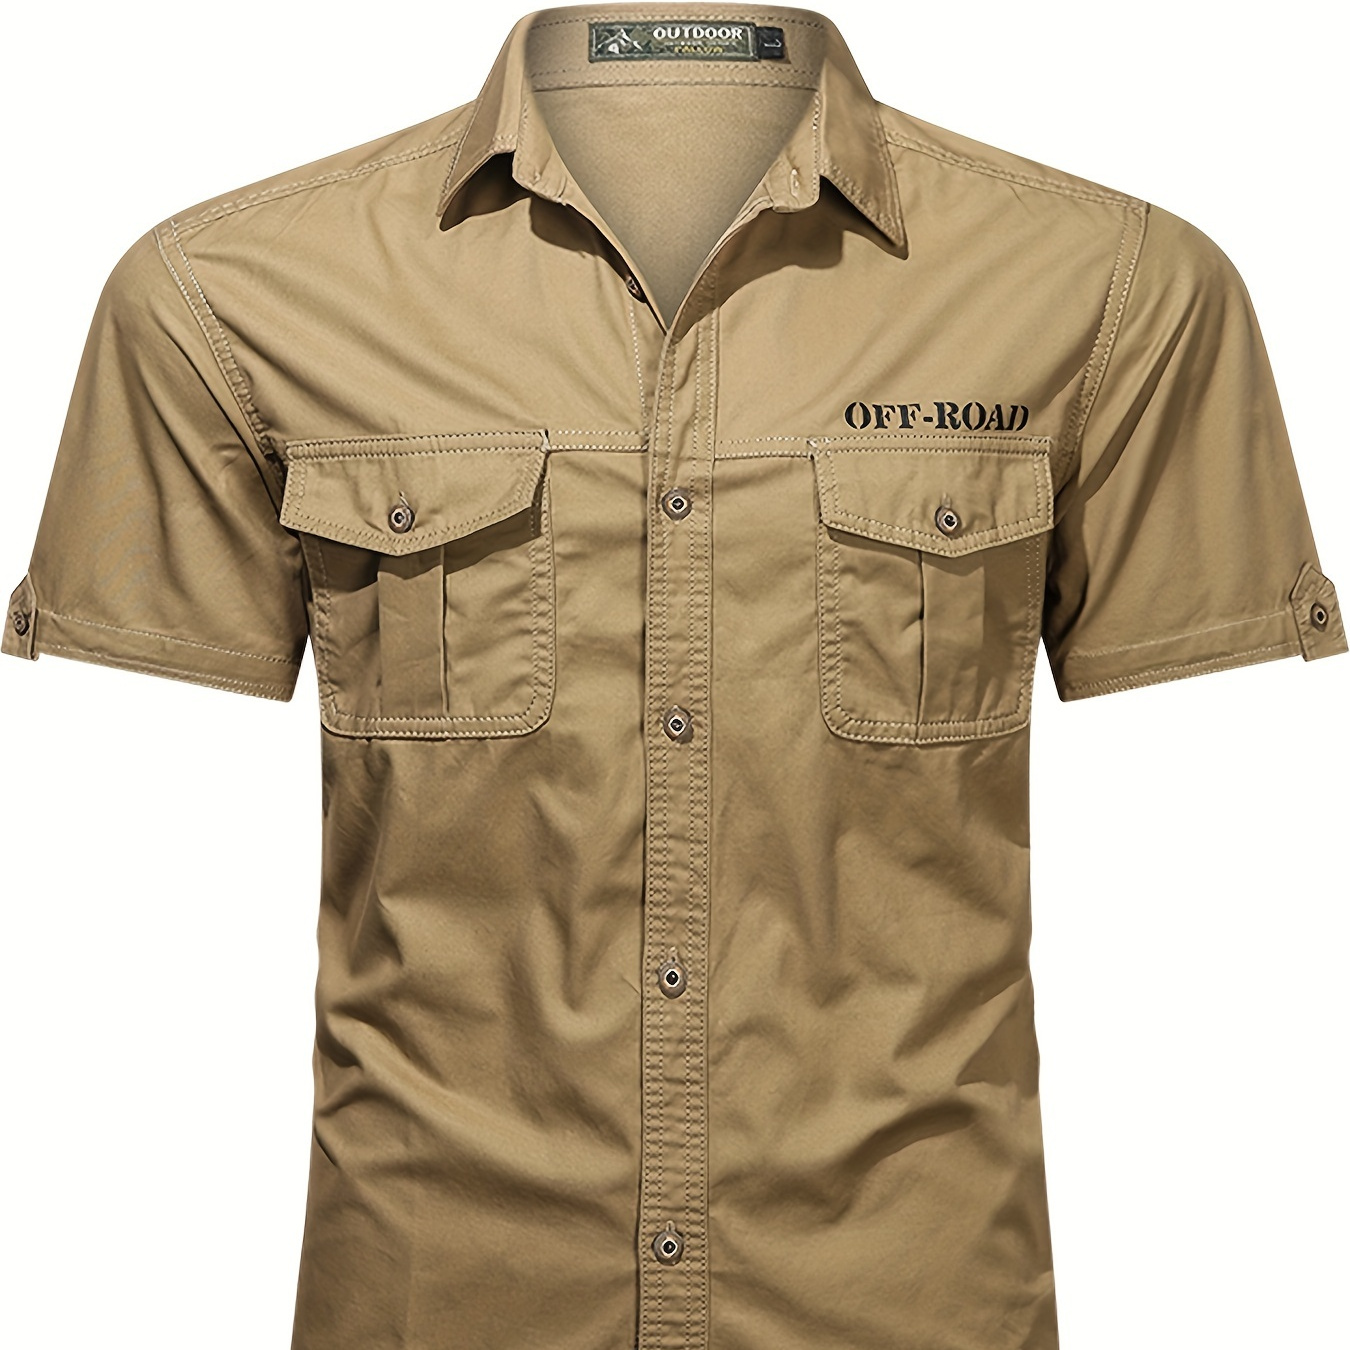 

Fashionable Design Men's Letter Print "off-road" Single-breasted Short Sleeve Lapel Cargo Shirt With Flap Pockets, Pure Cotton Tops For Summer Outdoors Activities